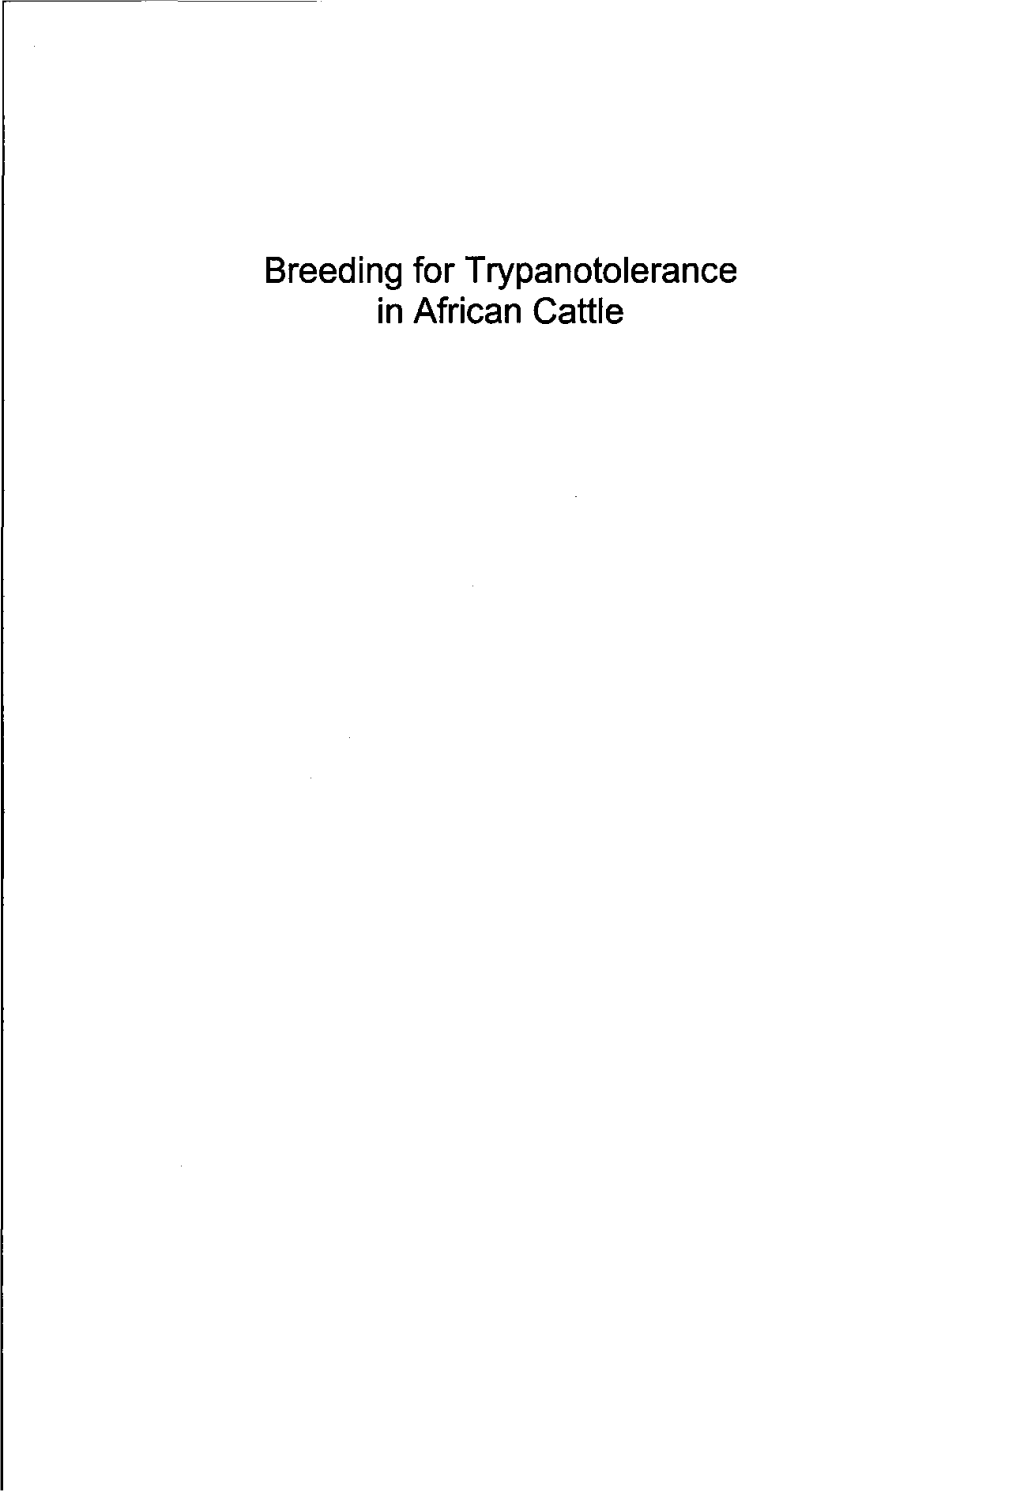 Breeding for Trypanotolerance in African Cattle